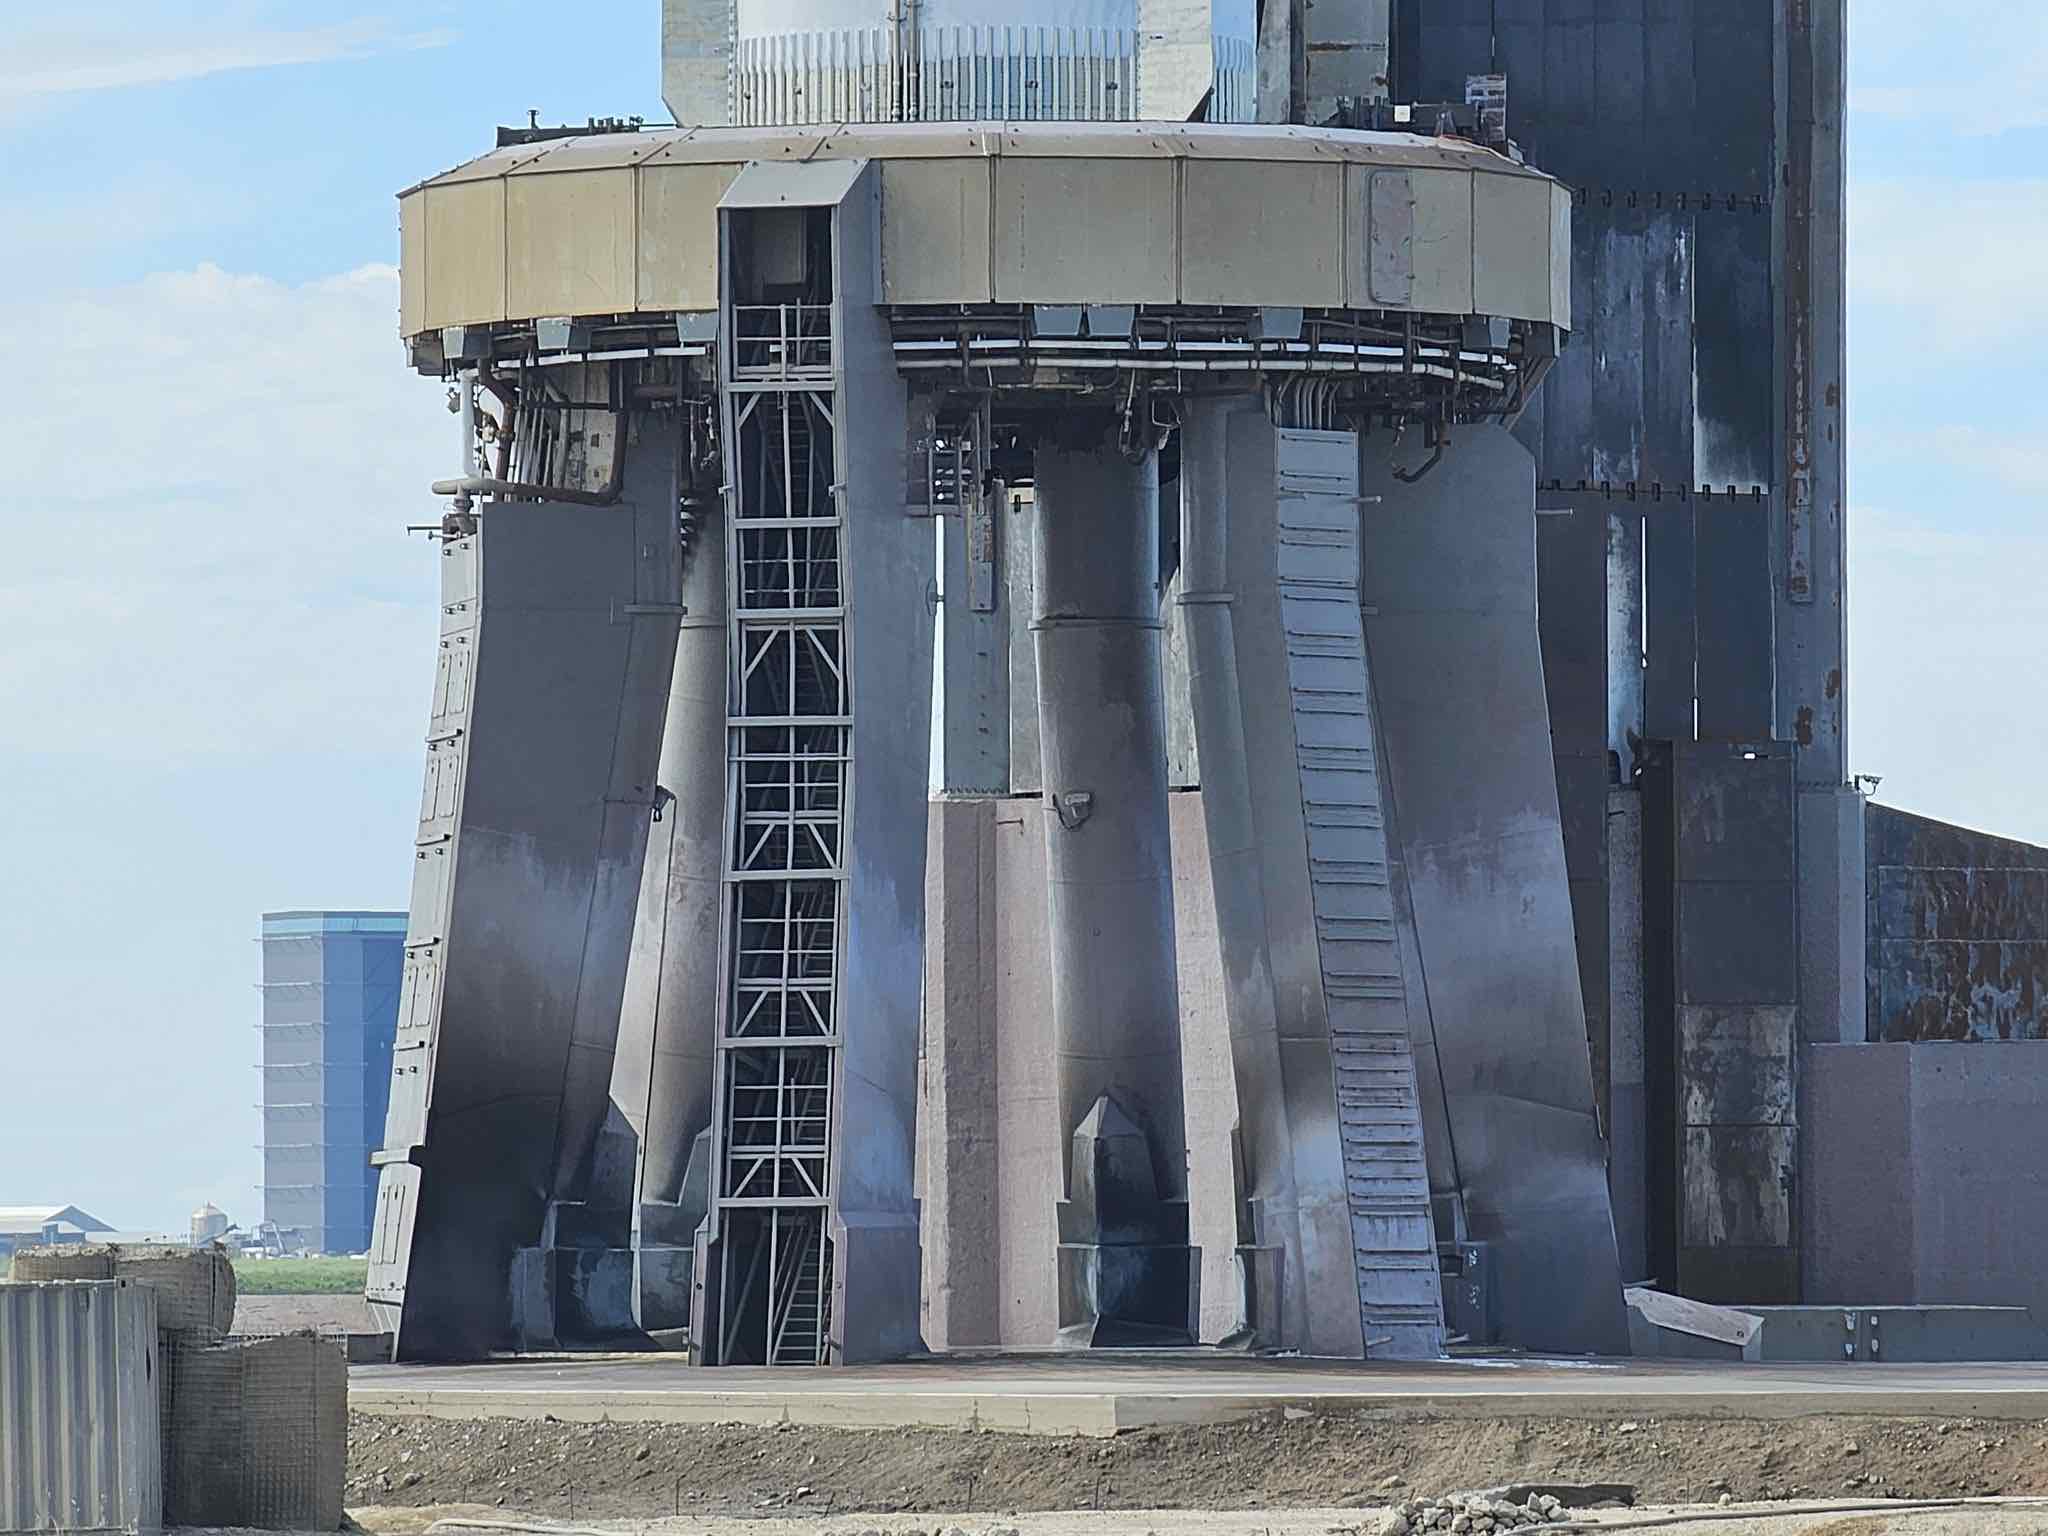 A close-up shot of the Orbital Launch Mount at SpaceX's Starbase Launch Site.